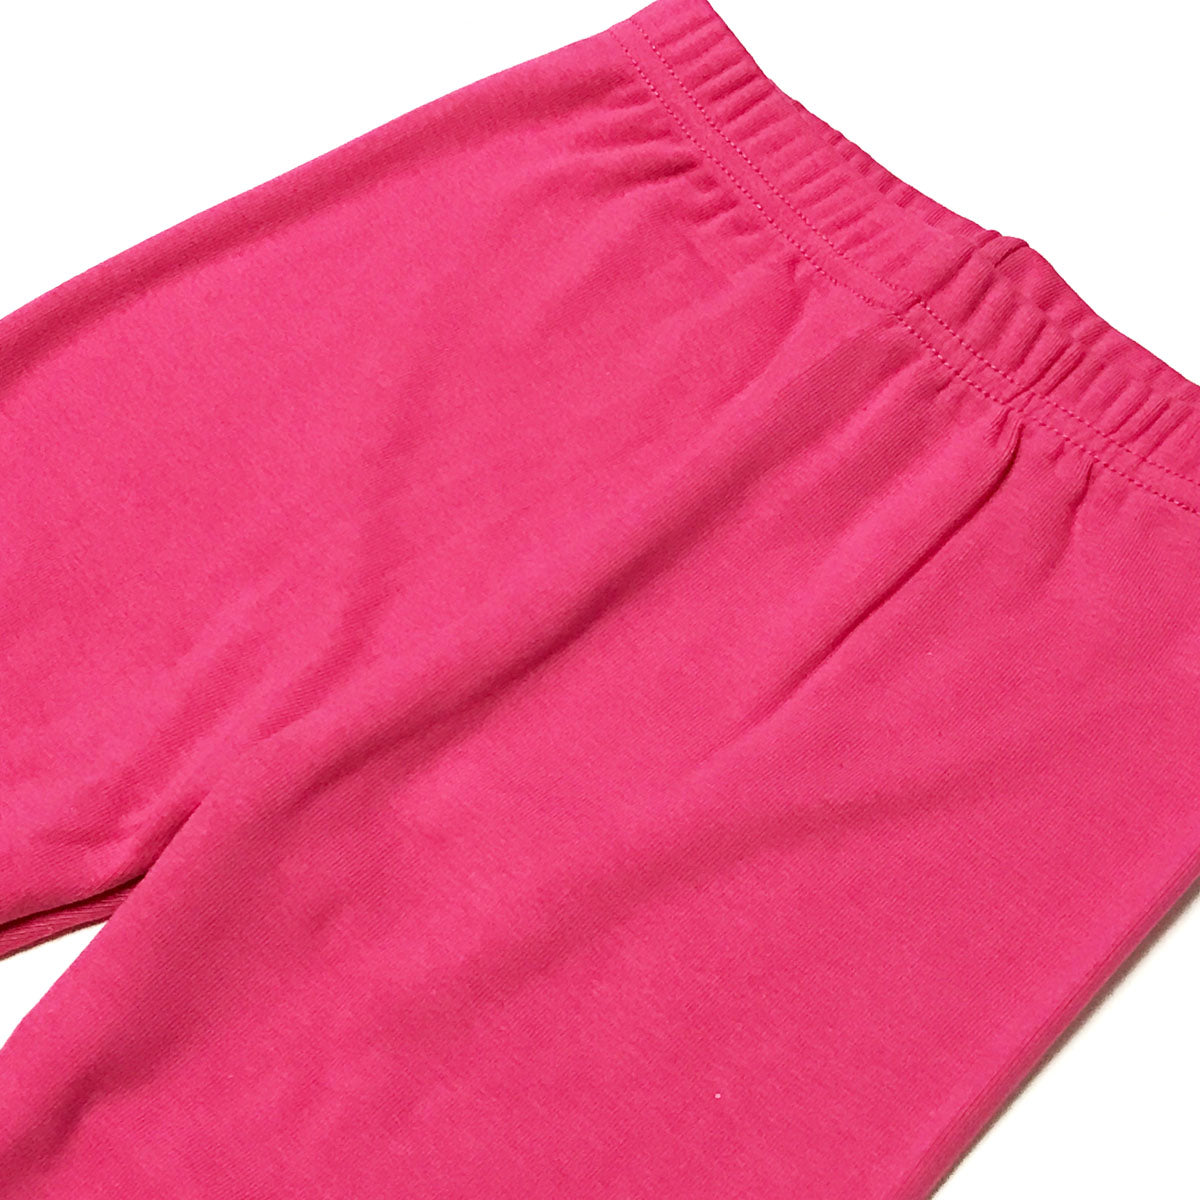 Wrapables Cotton Solid Colored Leggings for Girls (Set of 2), Fuschia and Pink, Small